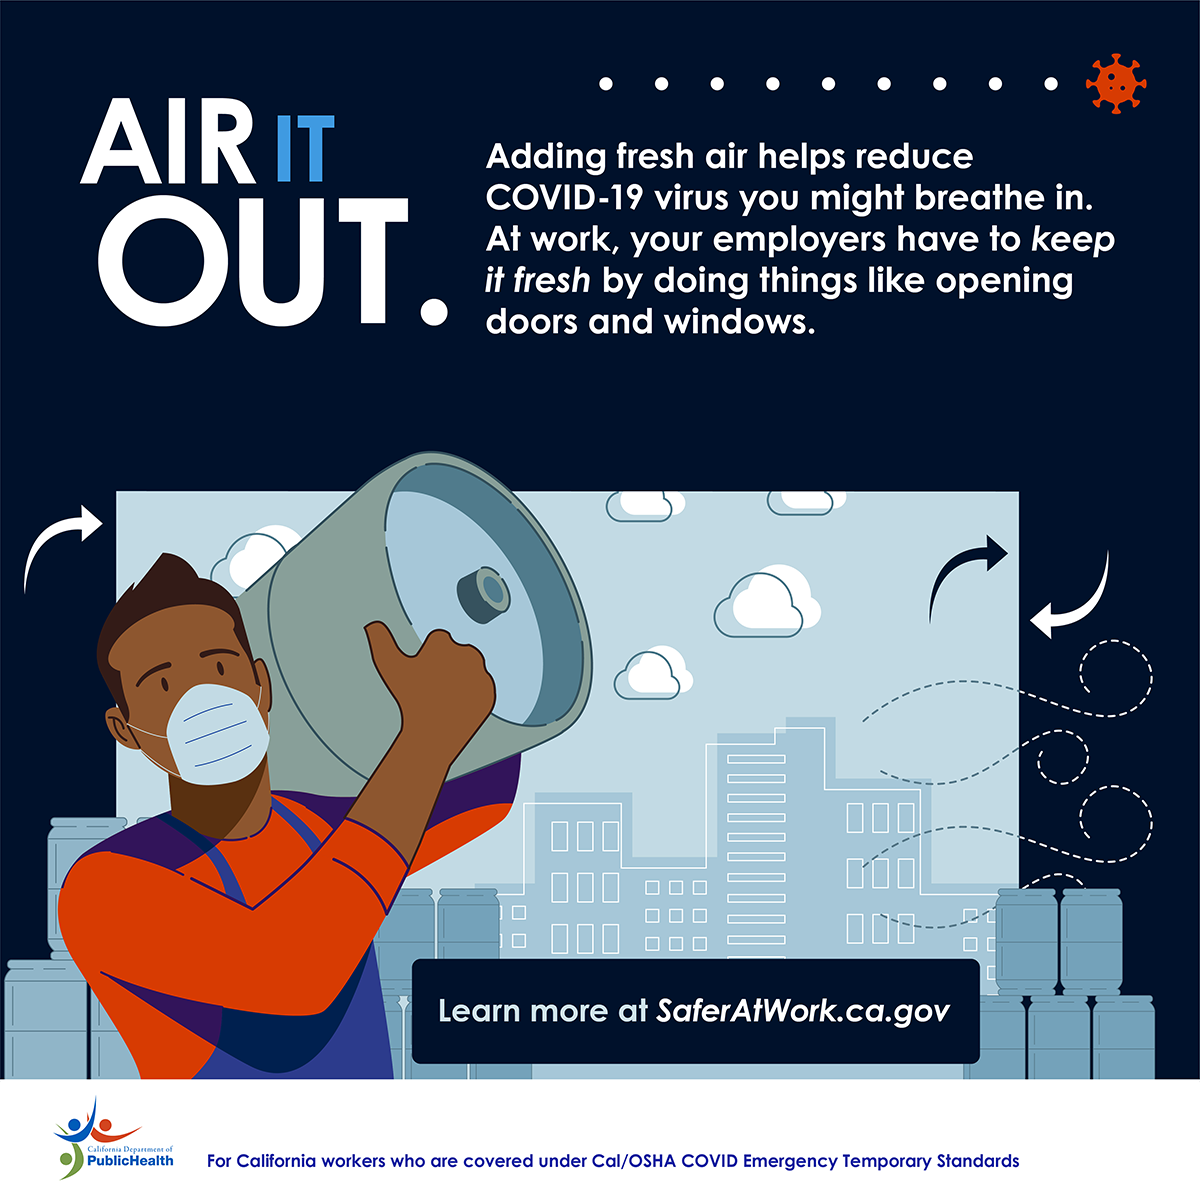 Air it out? Adding fresh air helps reduce COVID-19 virus you might breathe in. At work, your employers have to keep it freash by doing things like opeing doors and windows.